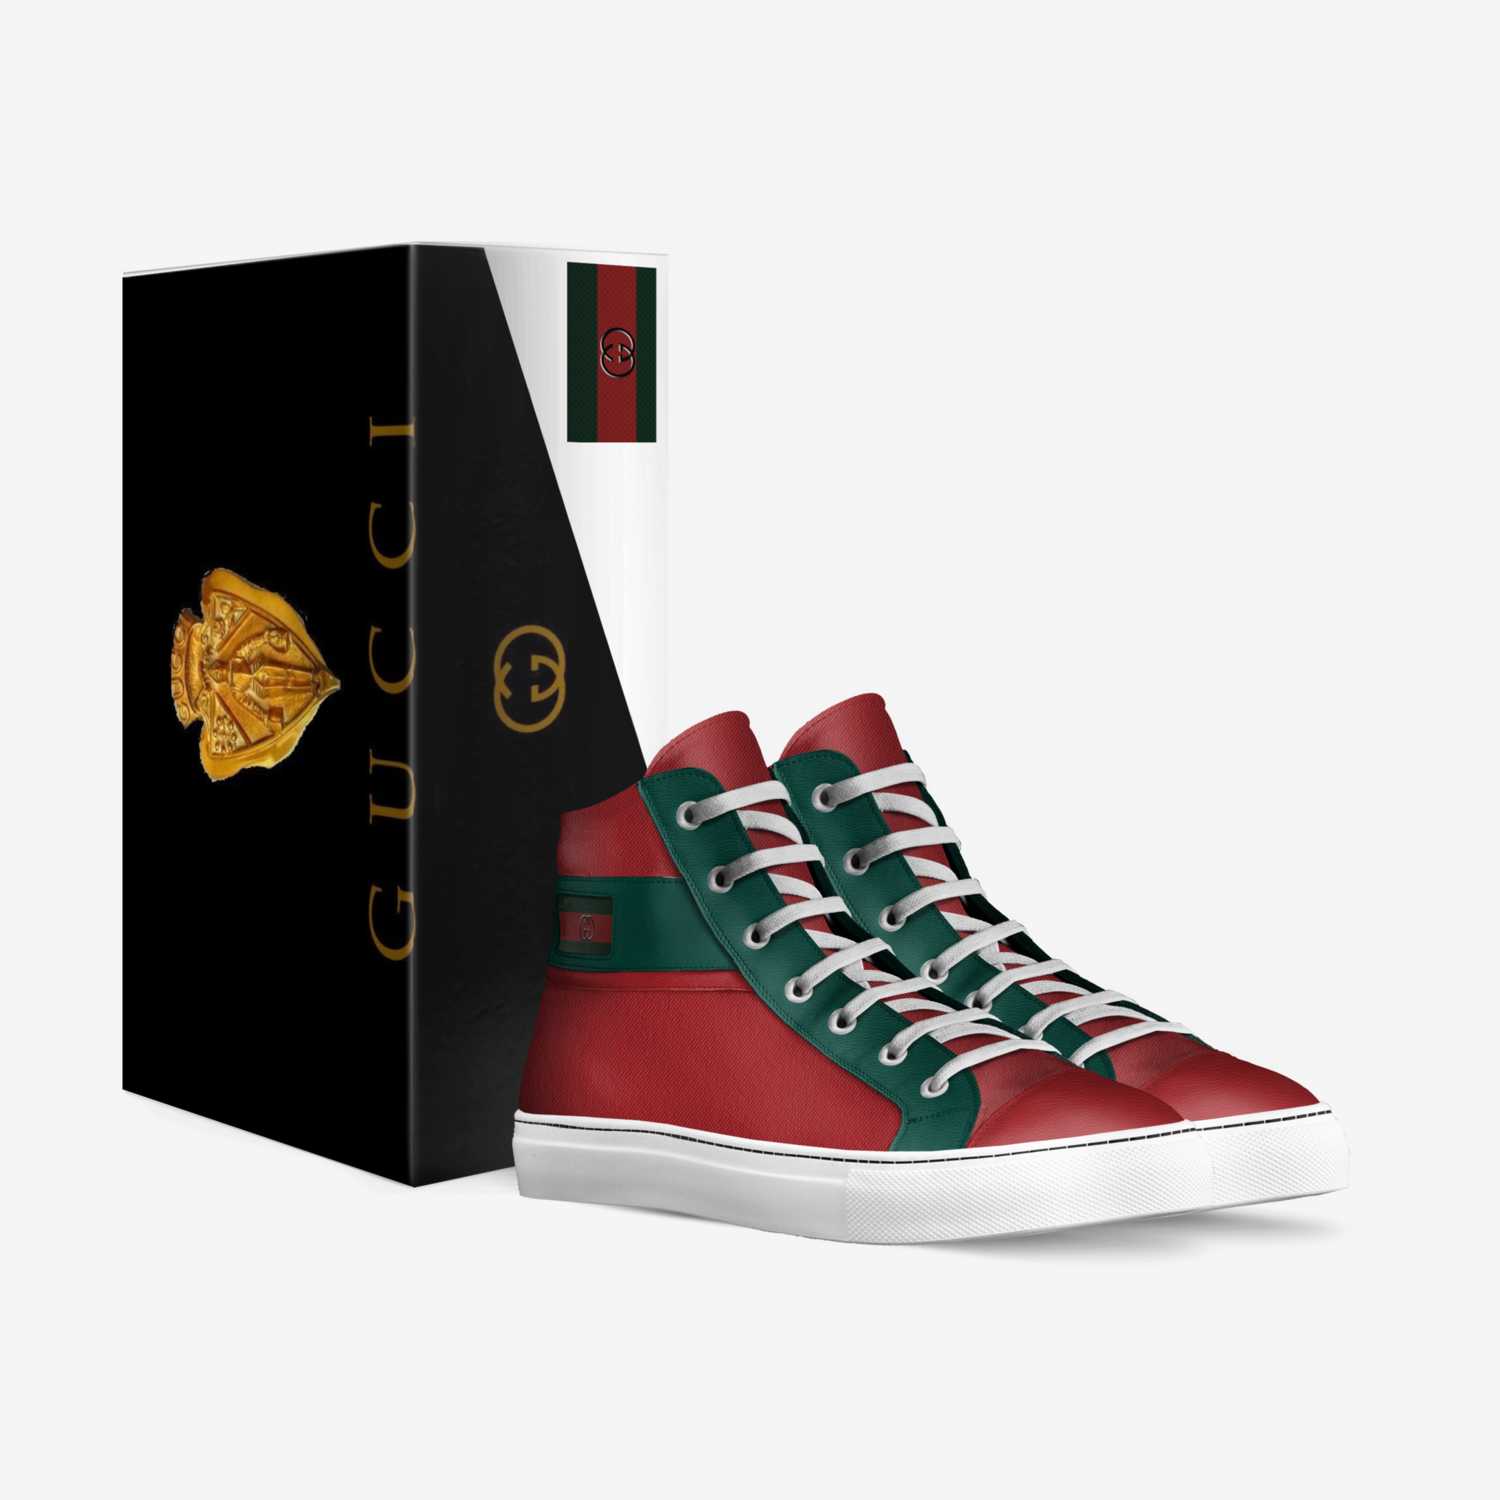 Gupreme custom made in Italy shoes by Eli Jones | Box view